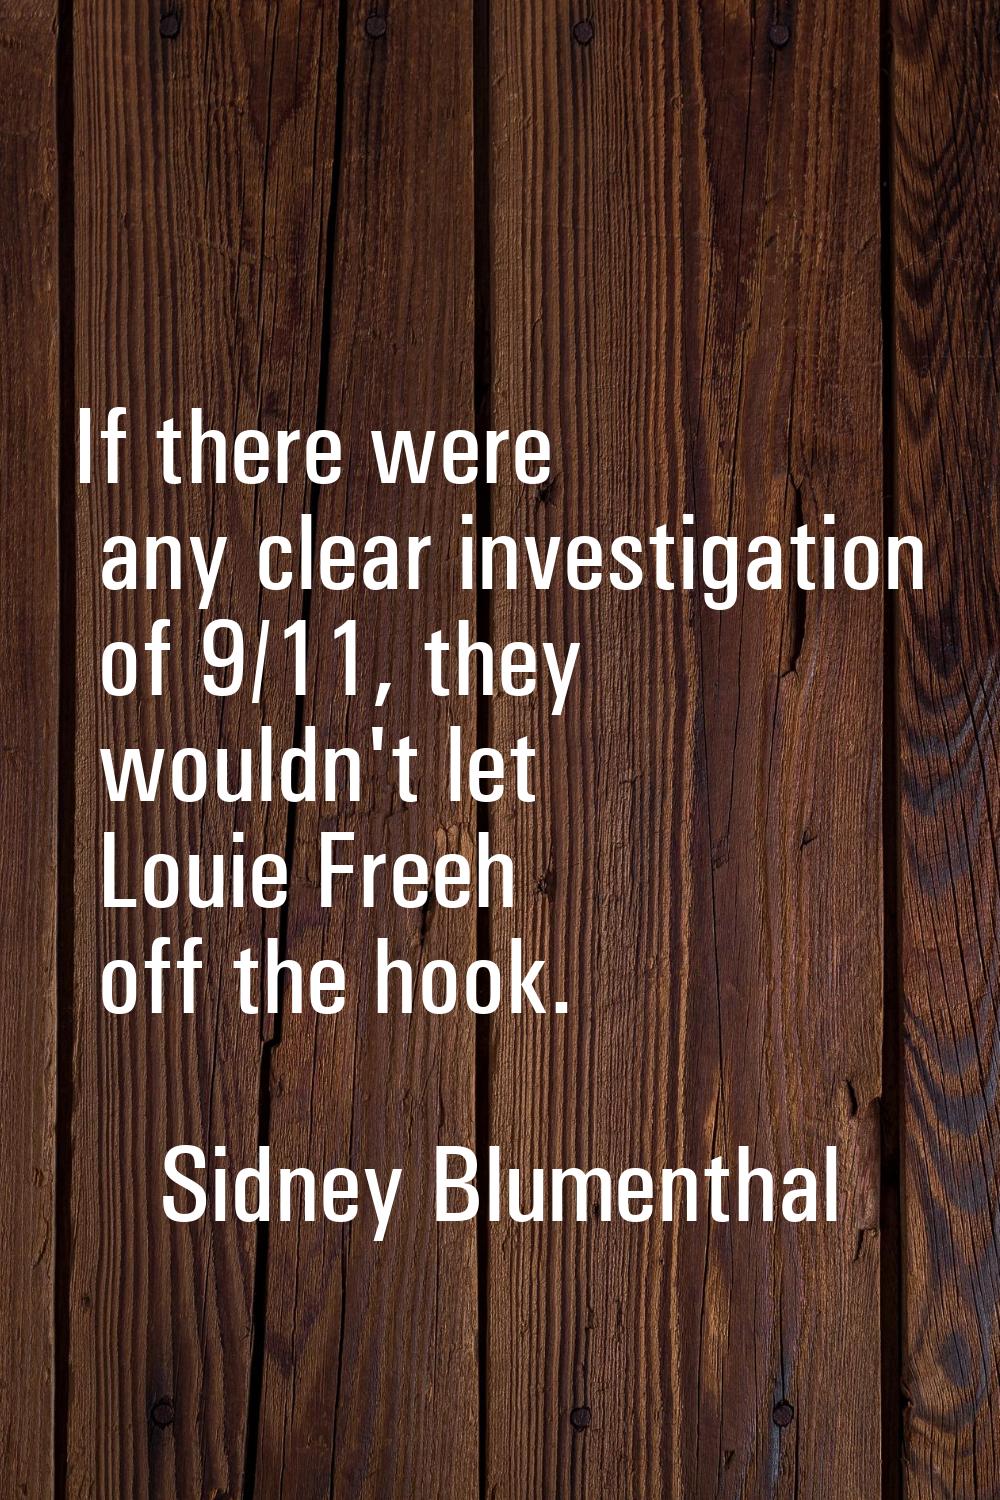 If there were any clear investigation of 9/11, they wouldn't let Louie Freeh off the hook.